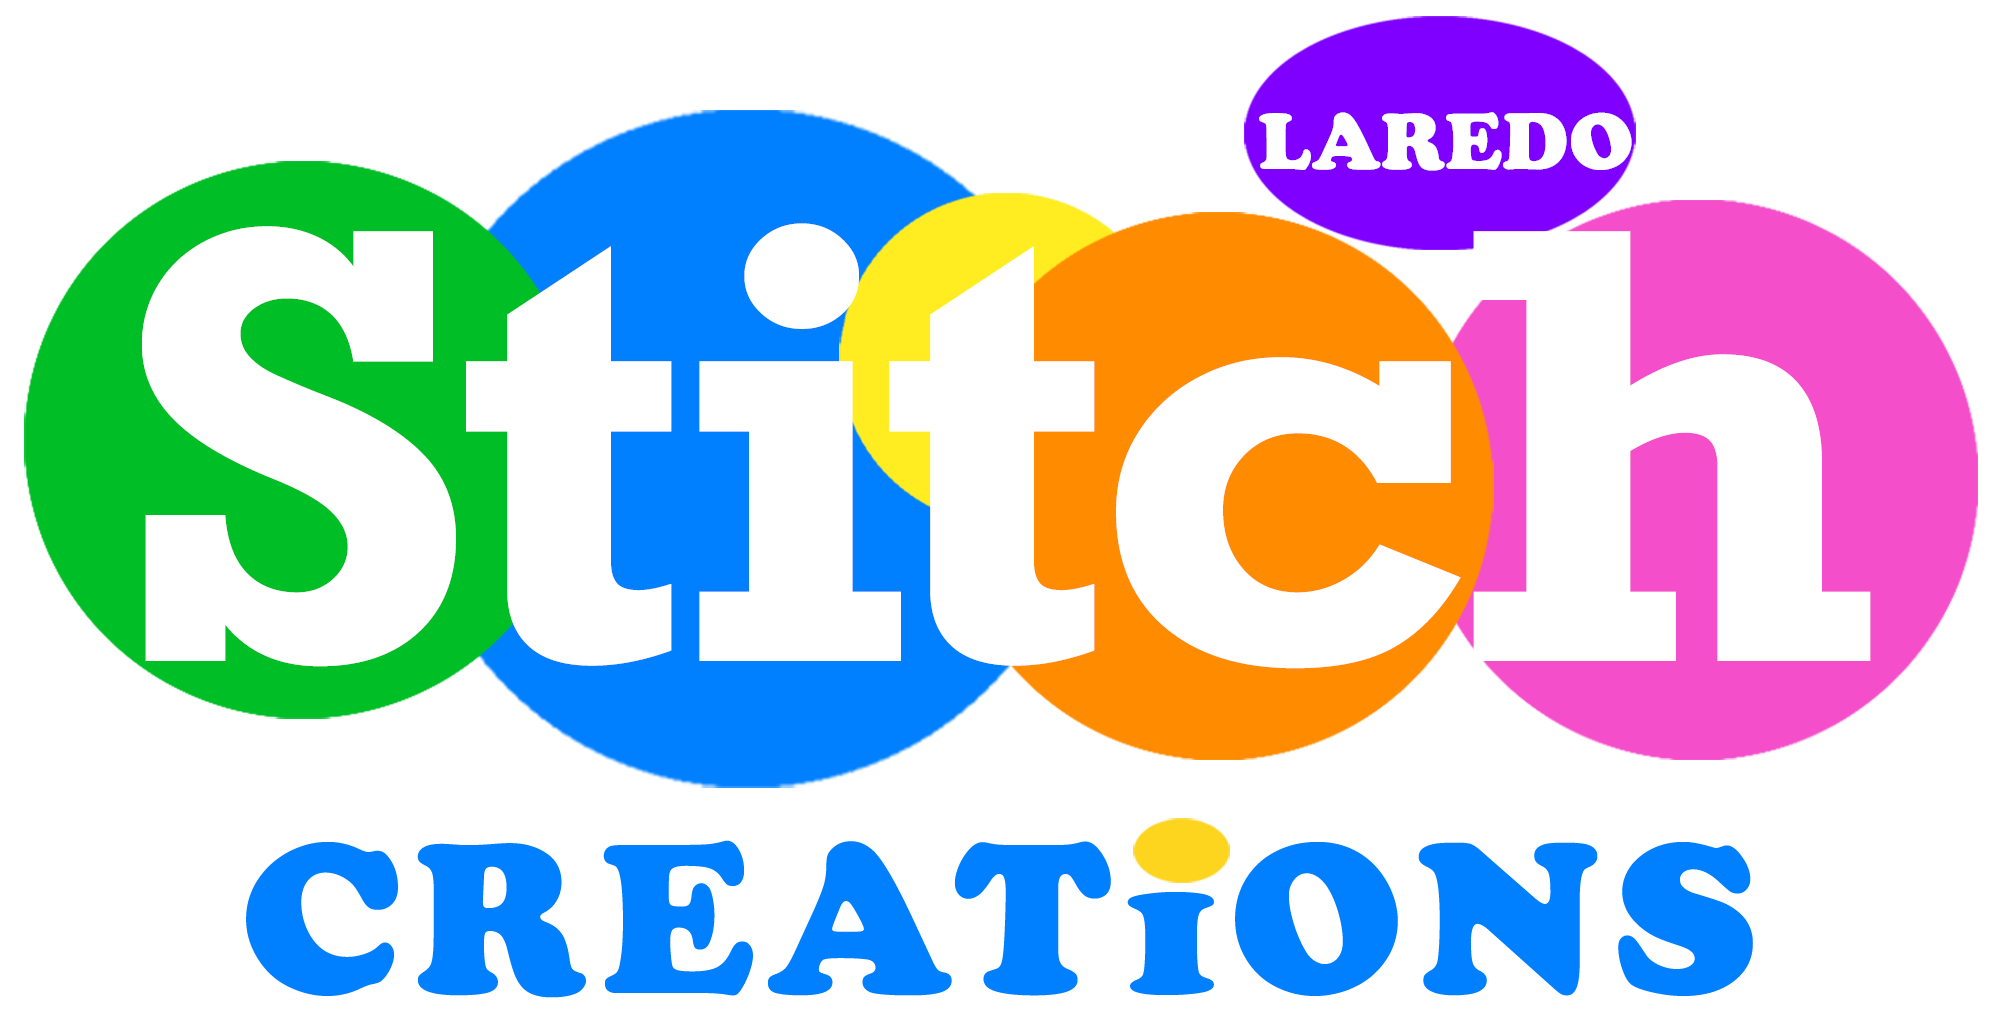 Laredo Stitch Creations: Promotional Products, Printing, and Embroidery in Laredo, TX